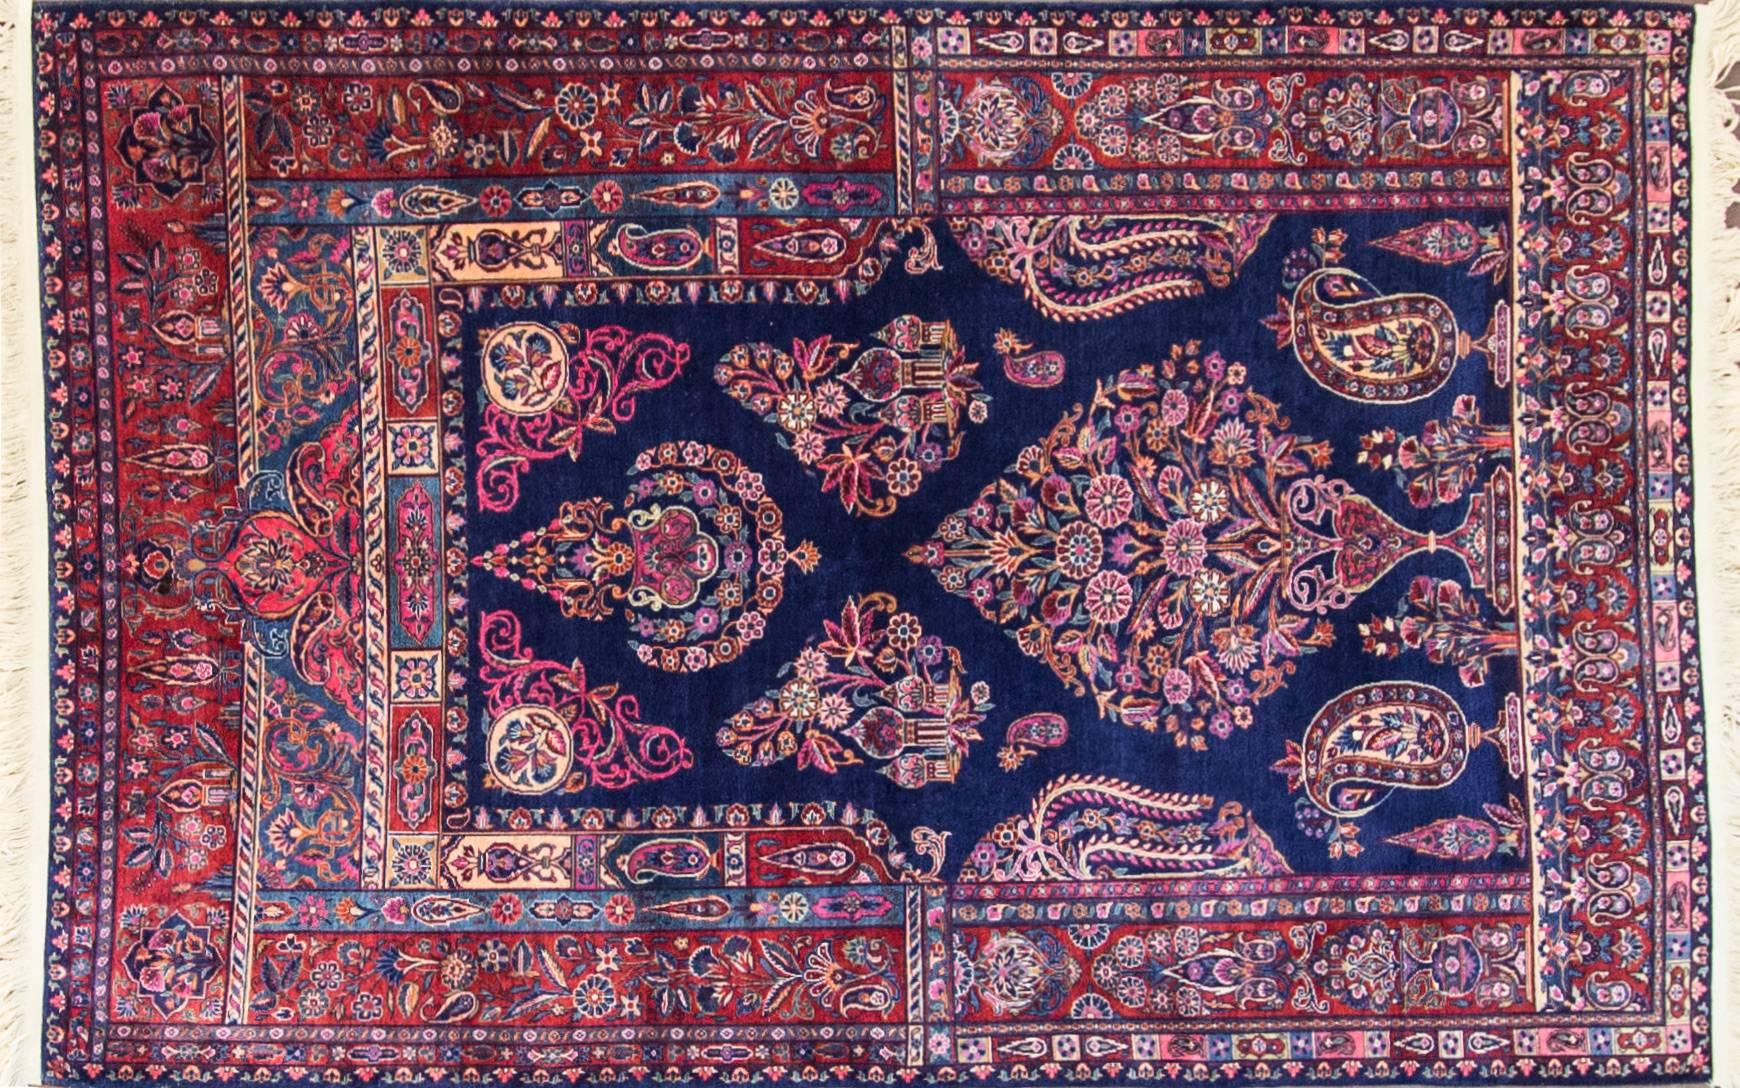 A Kashan rug made in Persia in the city of Kashan in Isfahan Province North Central Iran. There was production of Persian carpet at Royal workshops in the 17th and early 18th century. The Persian carpet workshops ceased production in about 1722